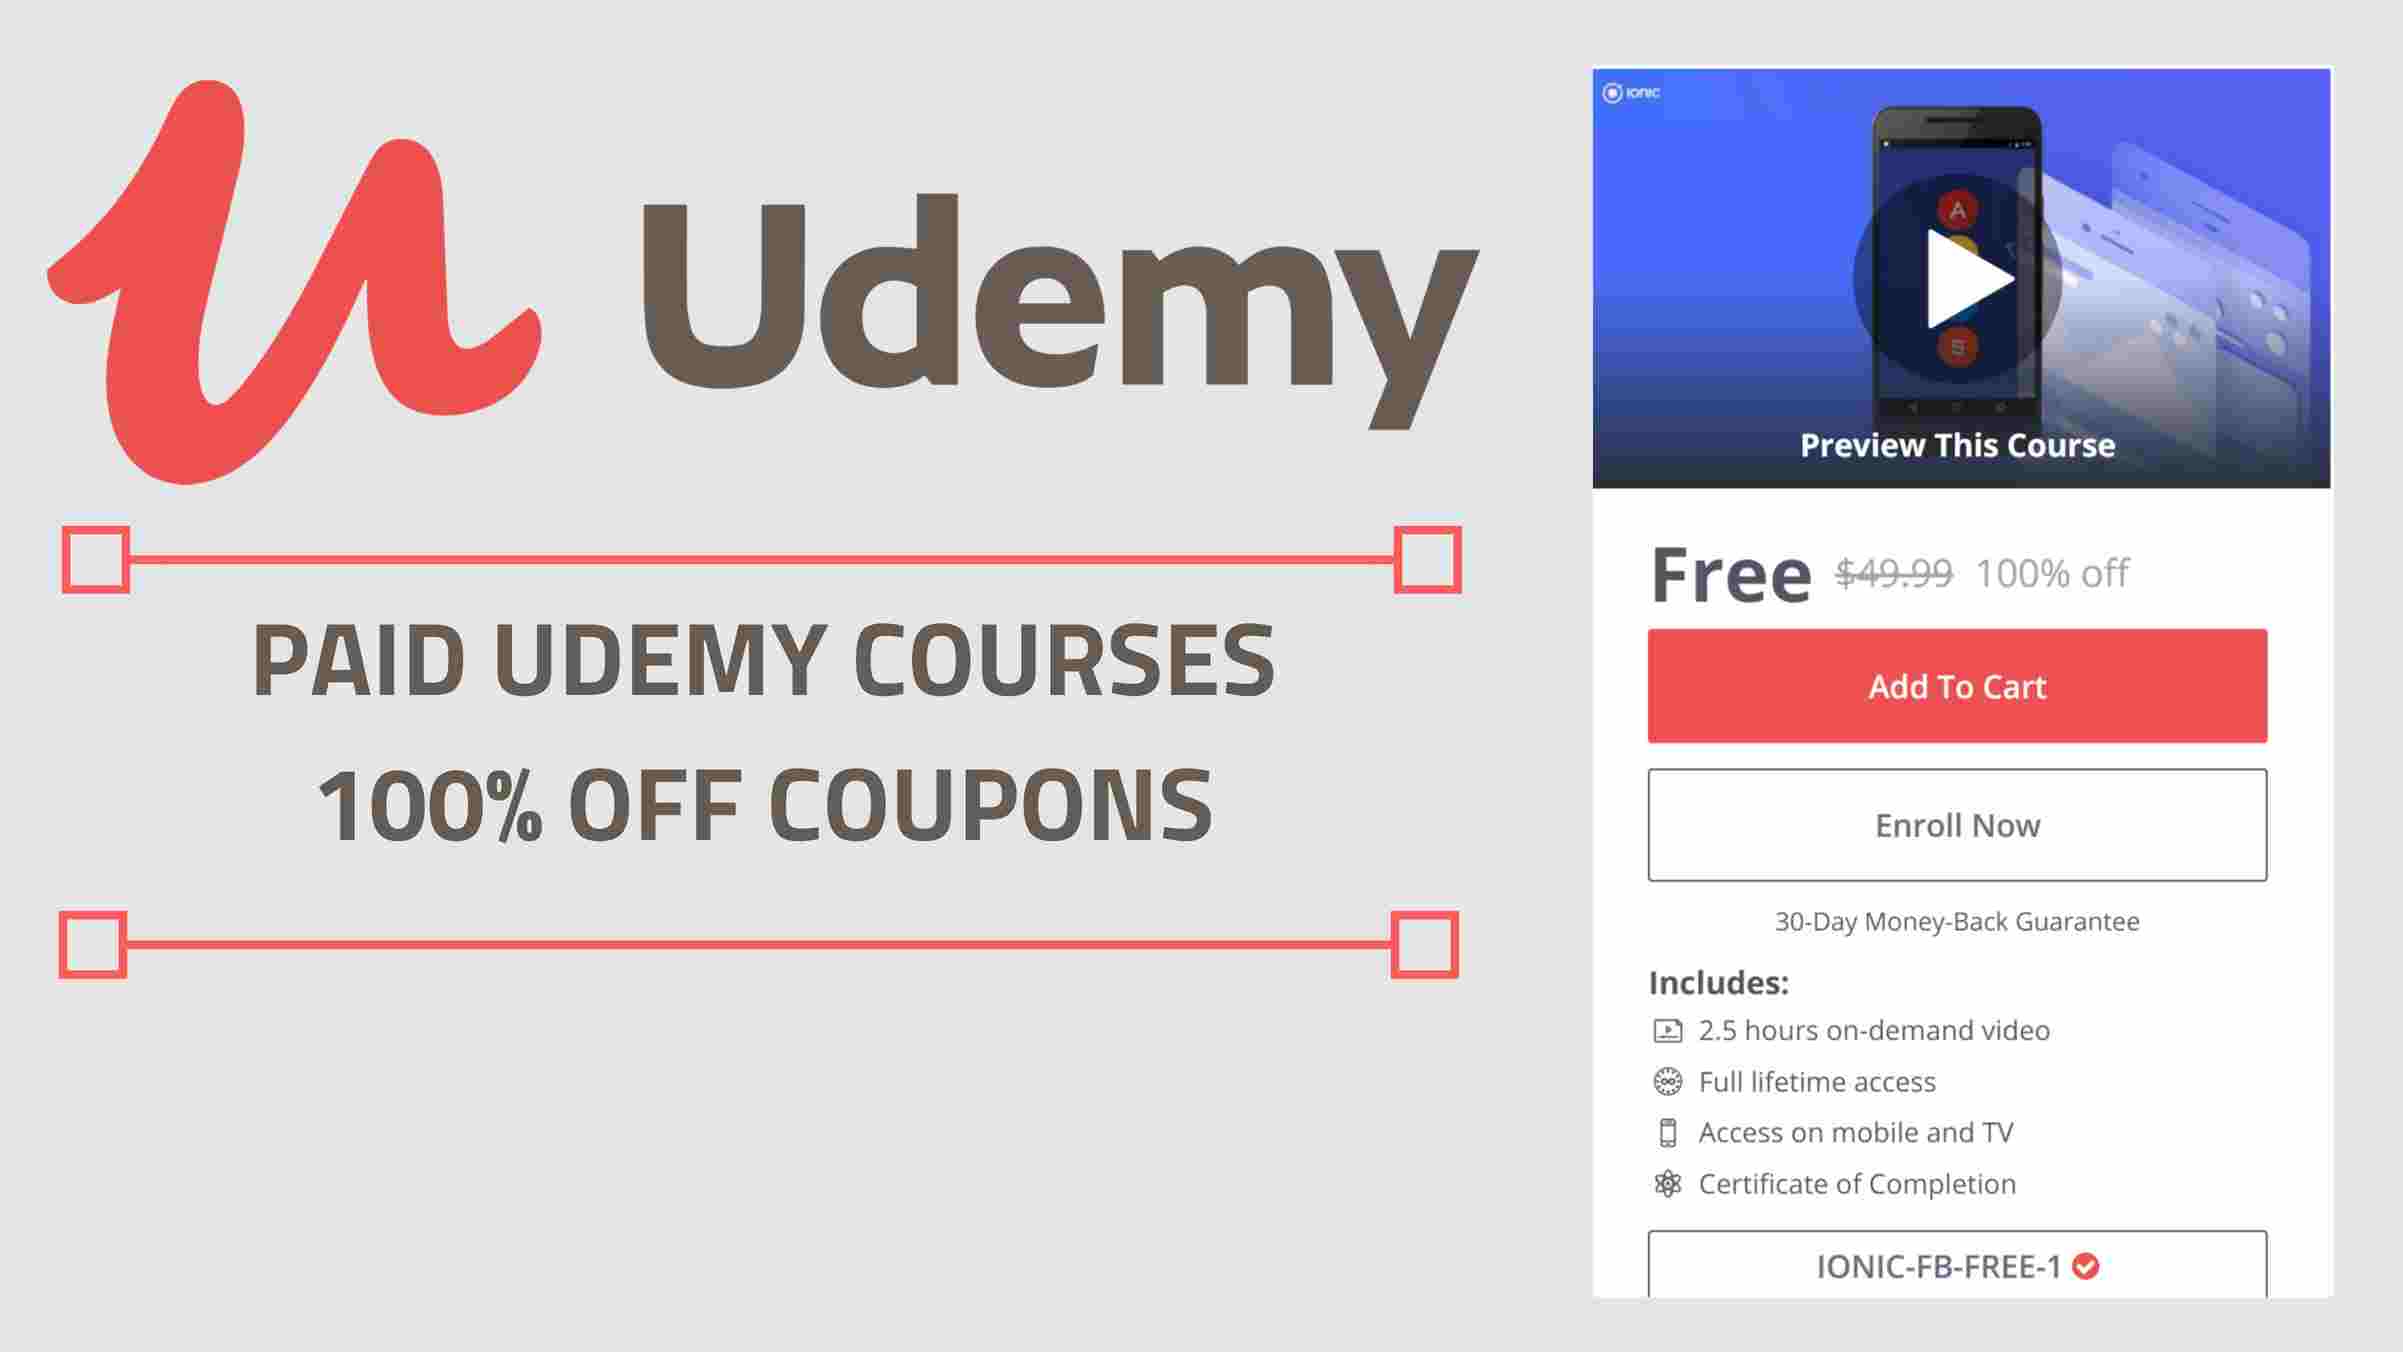 udemy - excel 2016 for windows and mac essentials